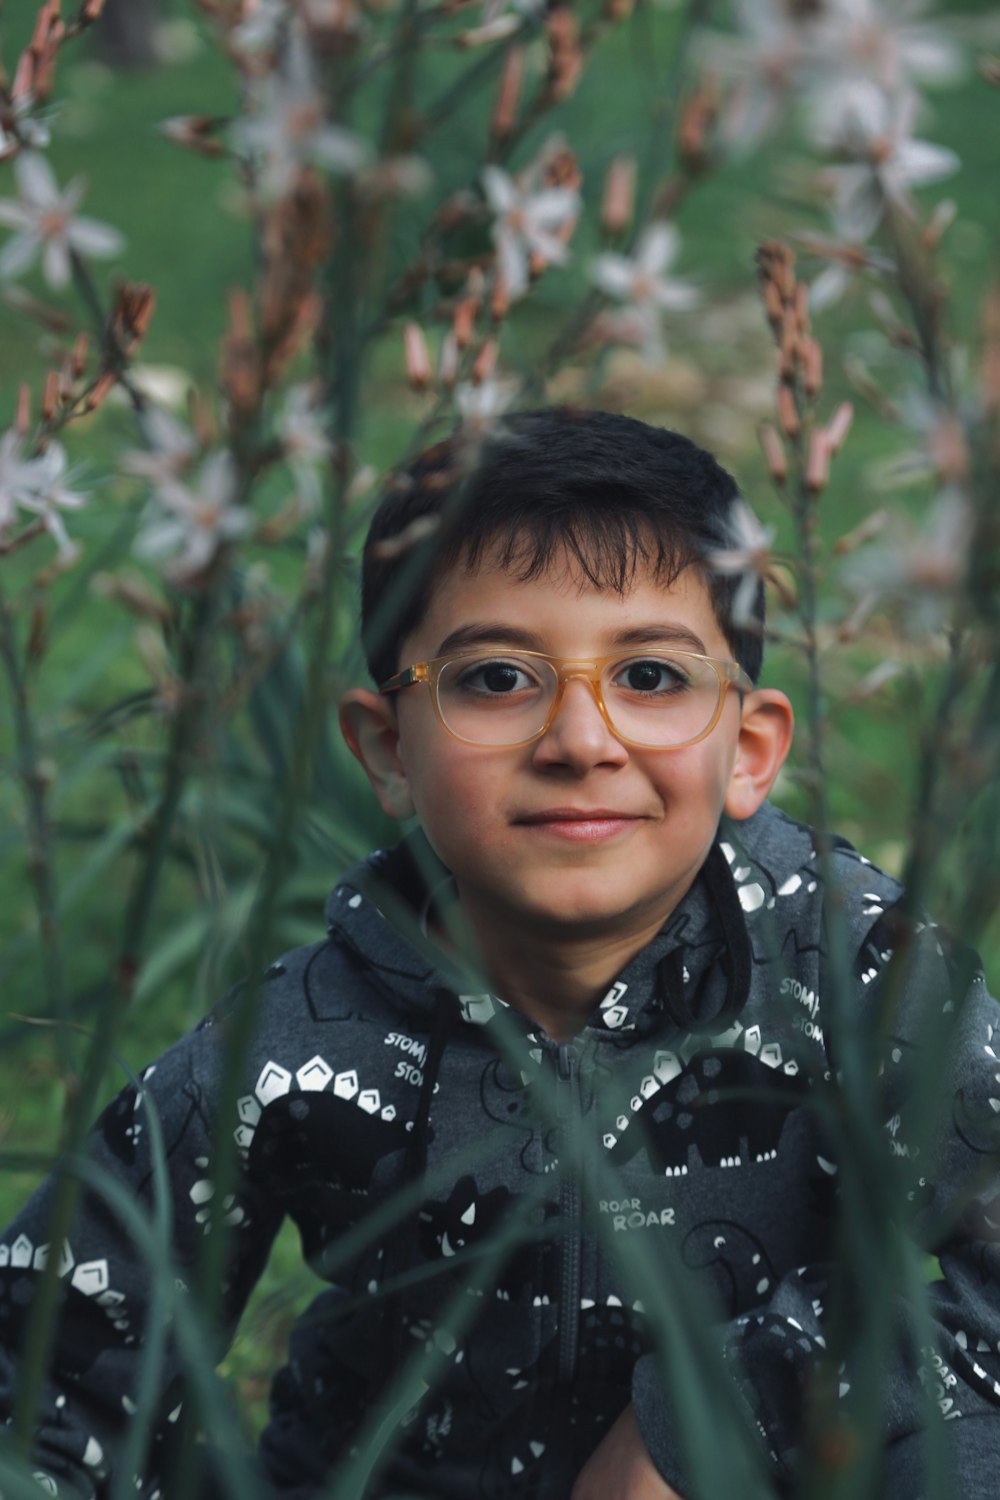 a young boy wearing glasses standing in a field of flowers